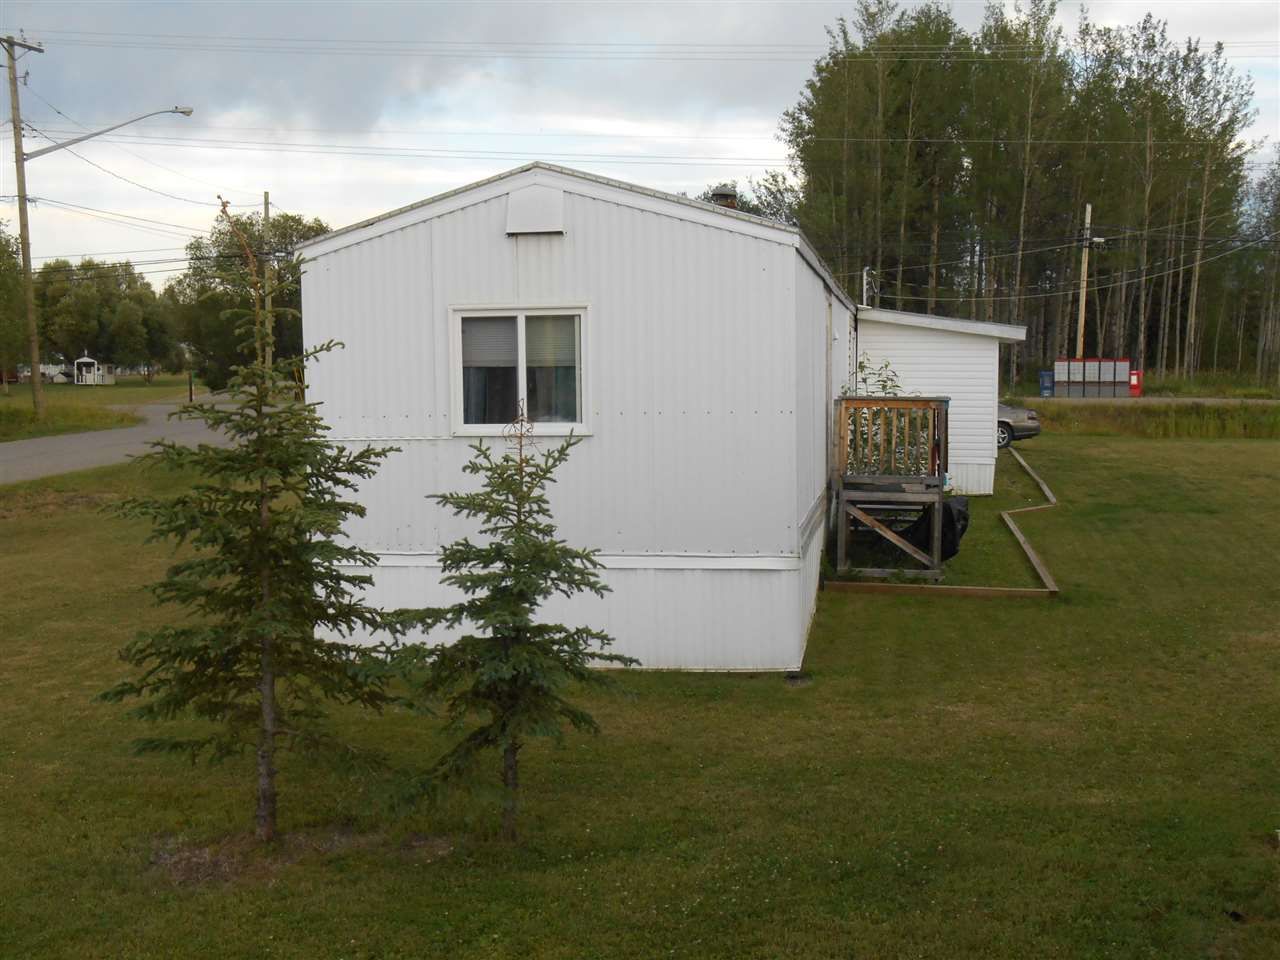 Photo 17: Photos: 2121 E MCLAREN Road in Prince George: North Blackburn Manufactured Home for sale (PG City South East (Zone 75))  : MLS®# R2104861